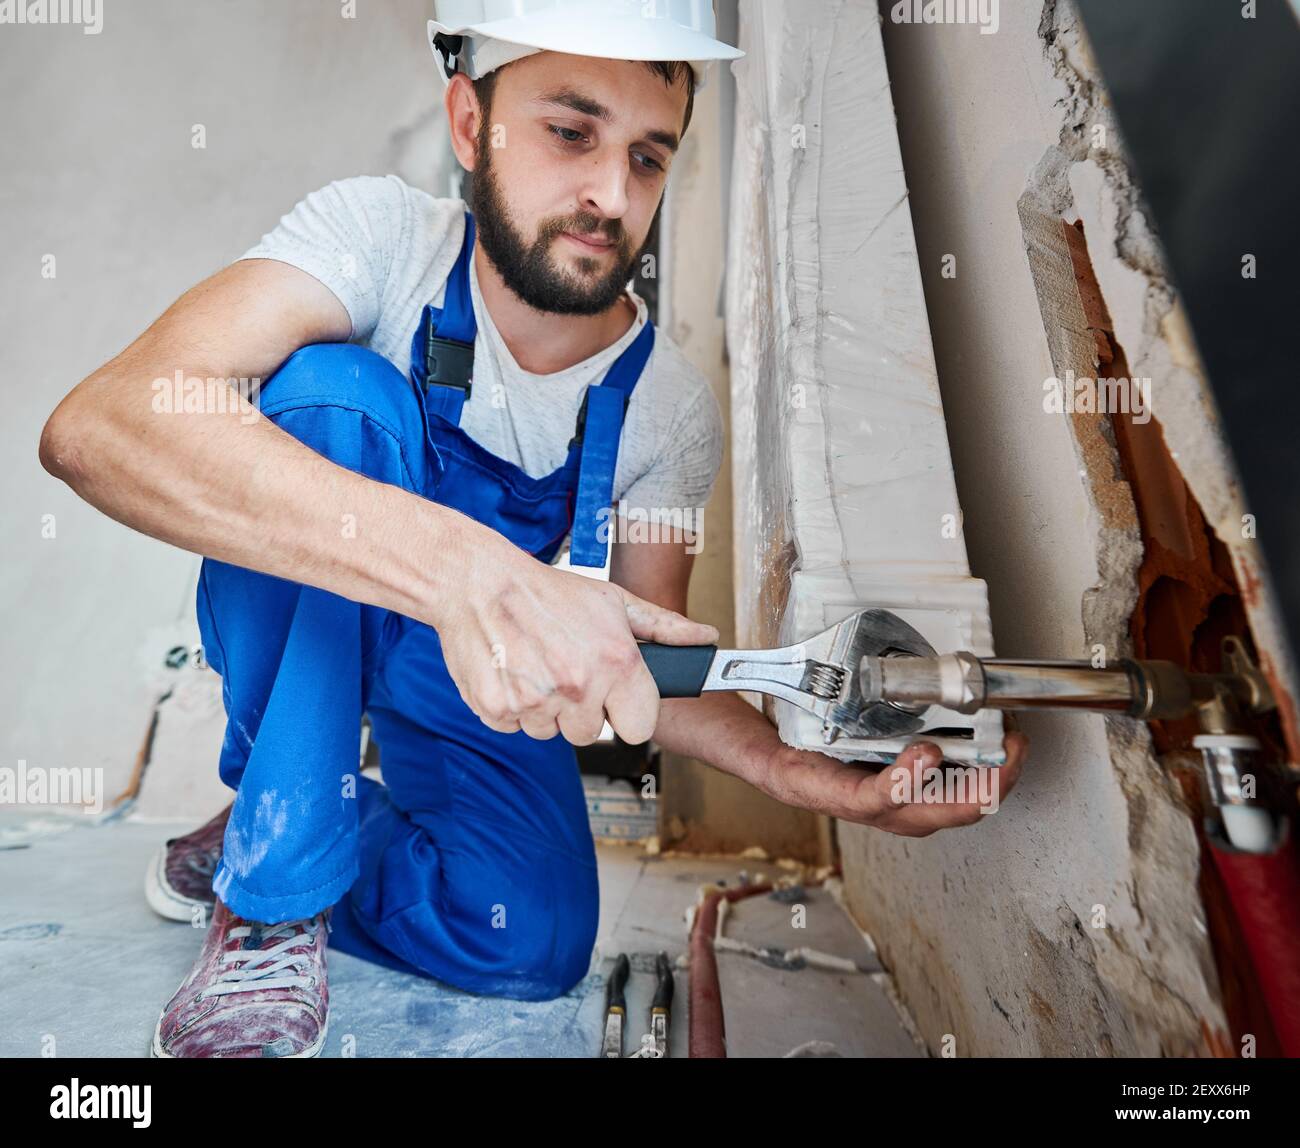 Horizontal snapshot of handsome plumber screwing plumbing fittings with a wrench. Close-up of a strong arm working with a tool during installation works in new apartment. Construction concept Stock Photo